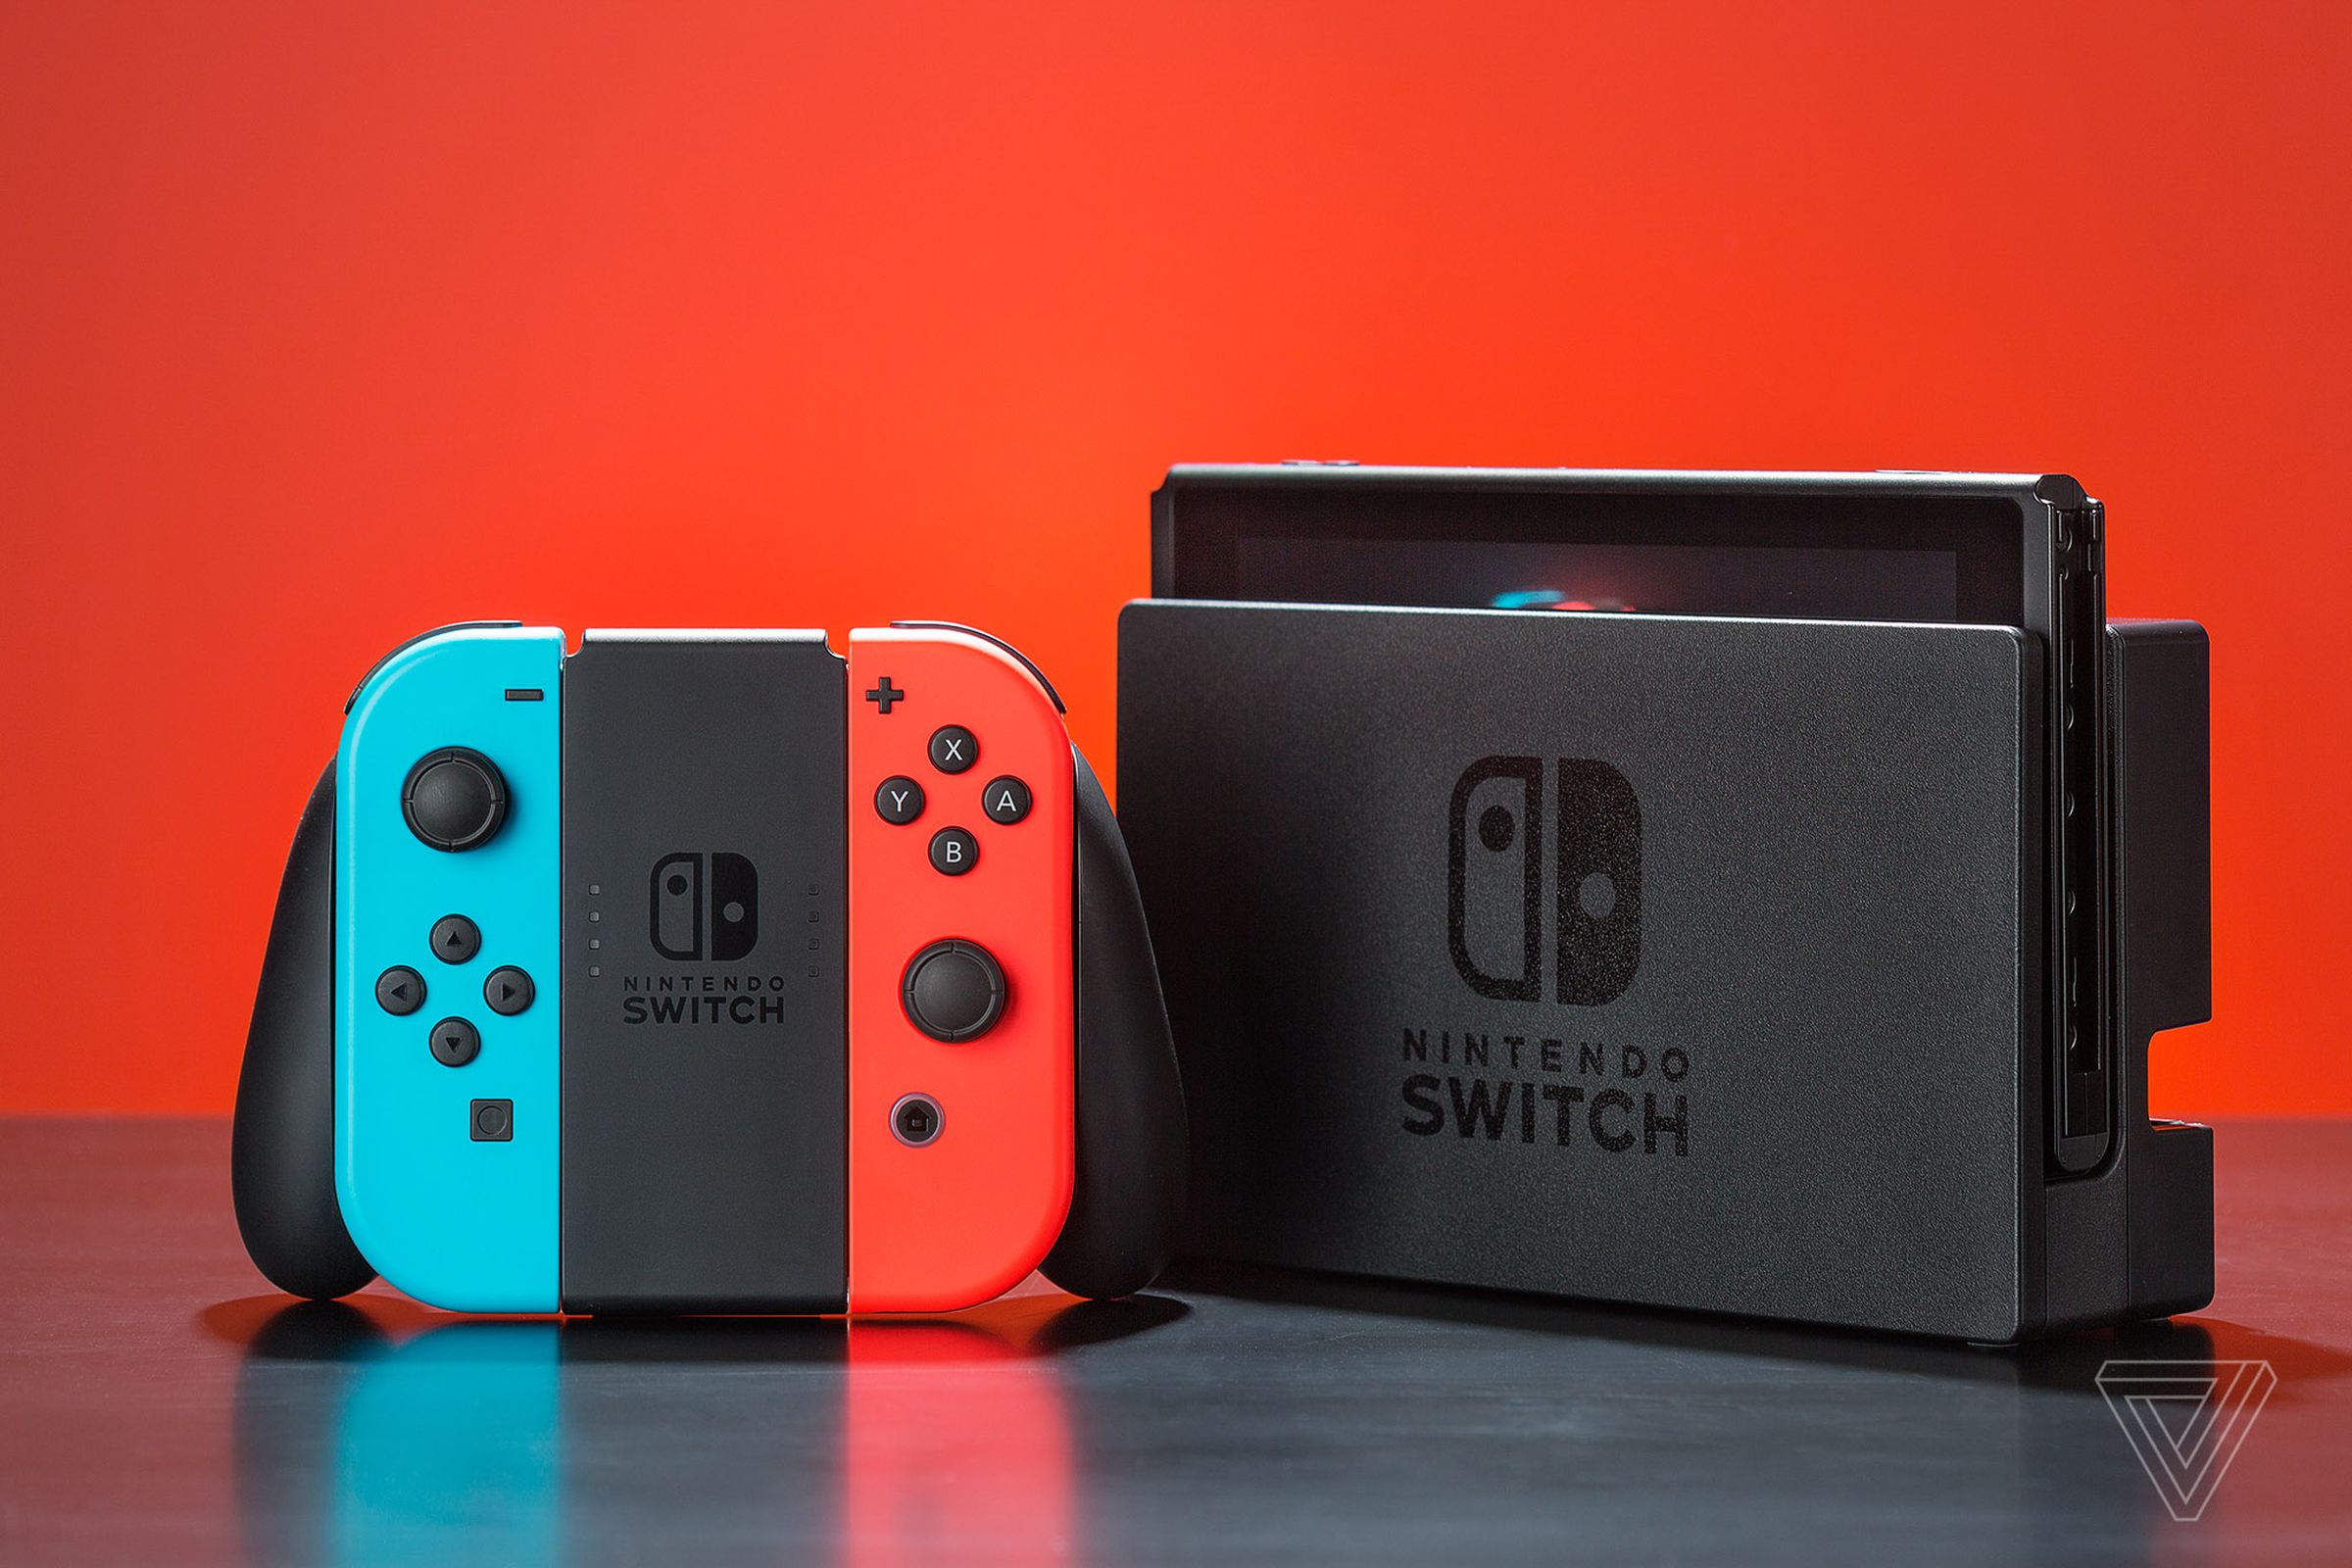 Nintendo’s Switch rarely sees a discount, though you can save money by purchasing one refurbished through its site.